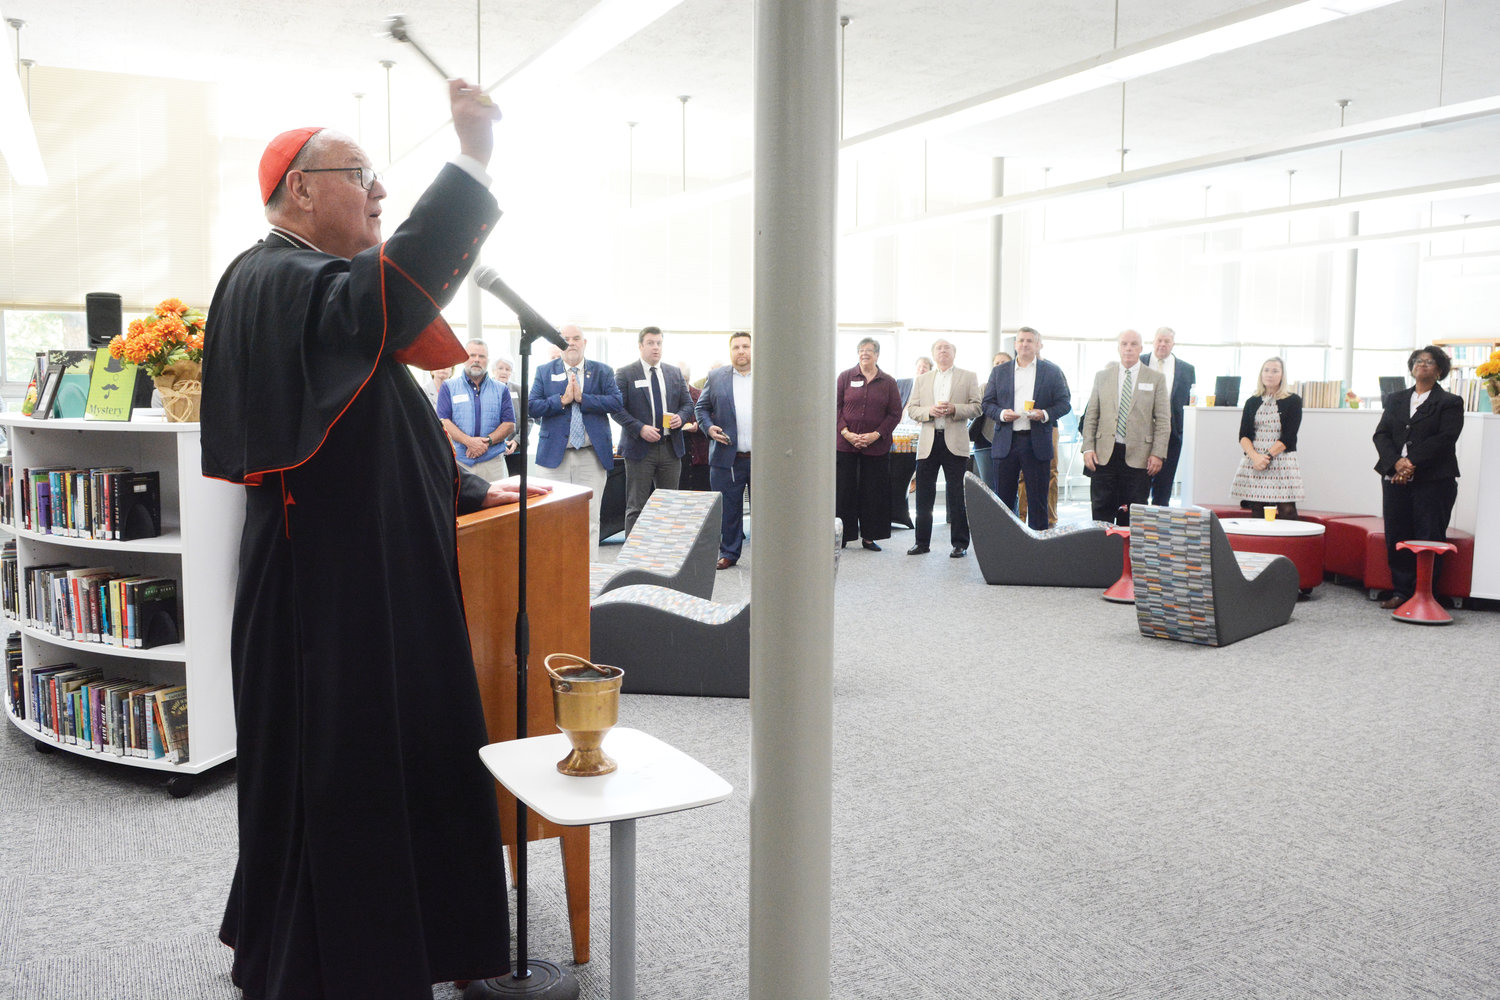 The cardinal blesses the Center for Innovation and Learning at Albertus Magnus during his tour of the Rockland County high school.